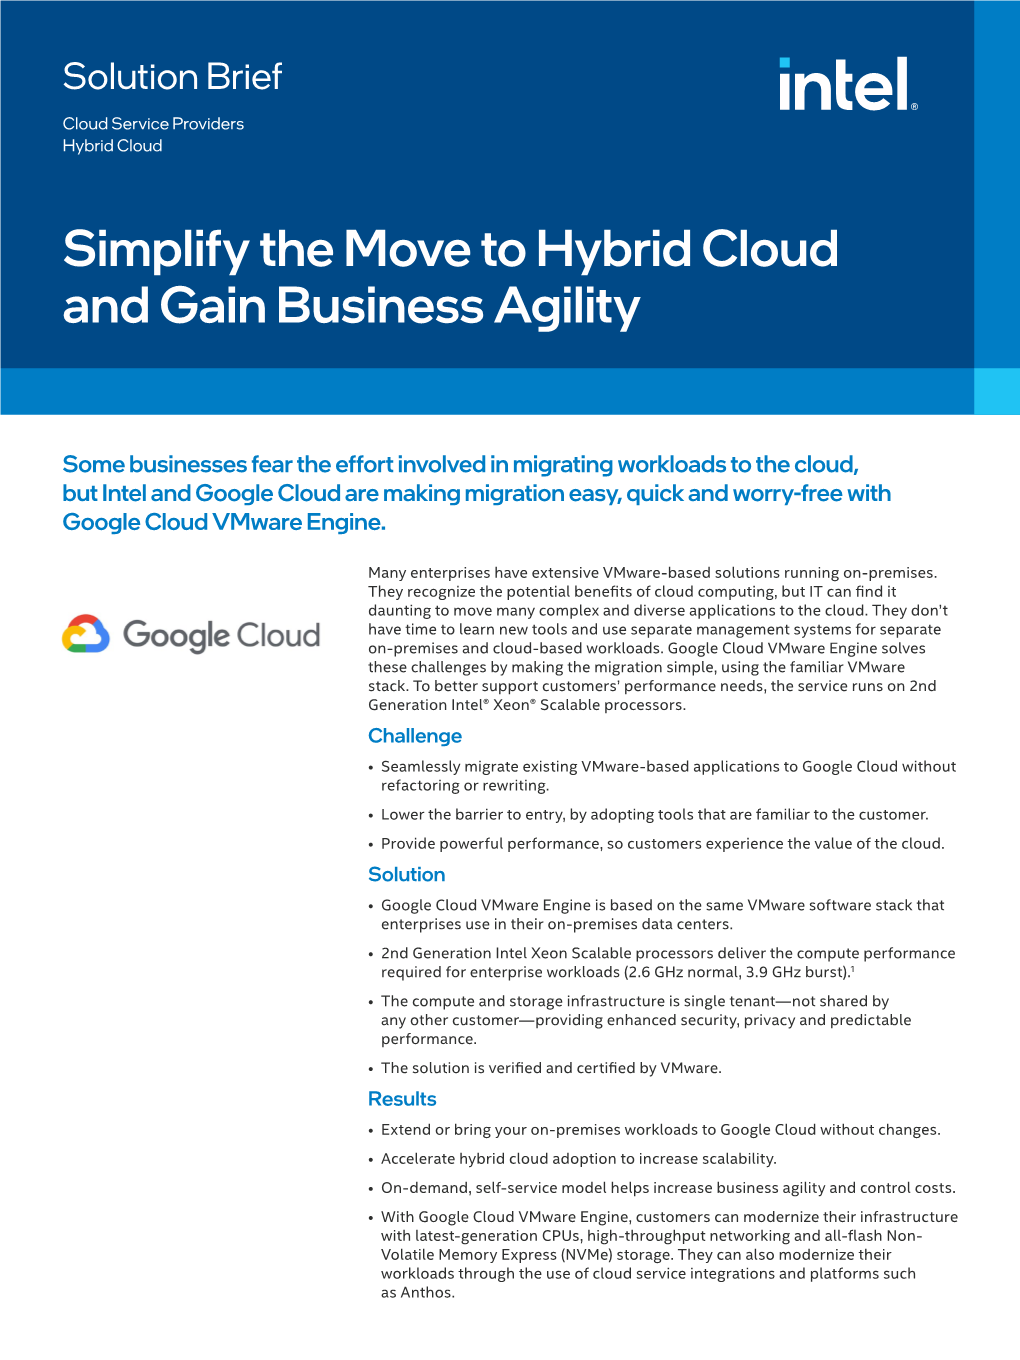 Simplify the Move to Hybrid Cloud and Gain Business Agility Solution Brief